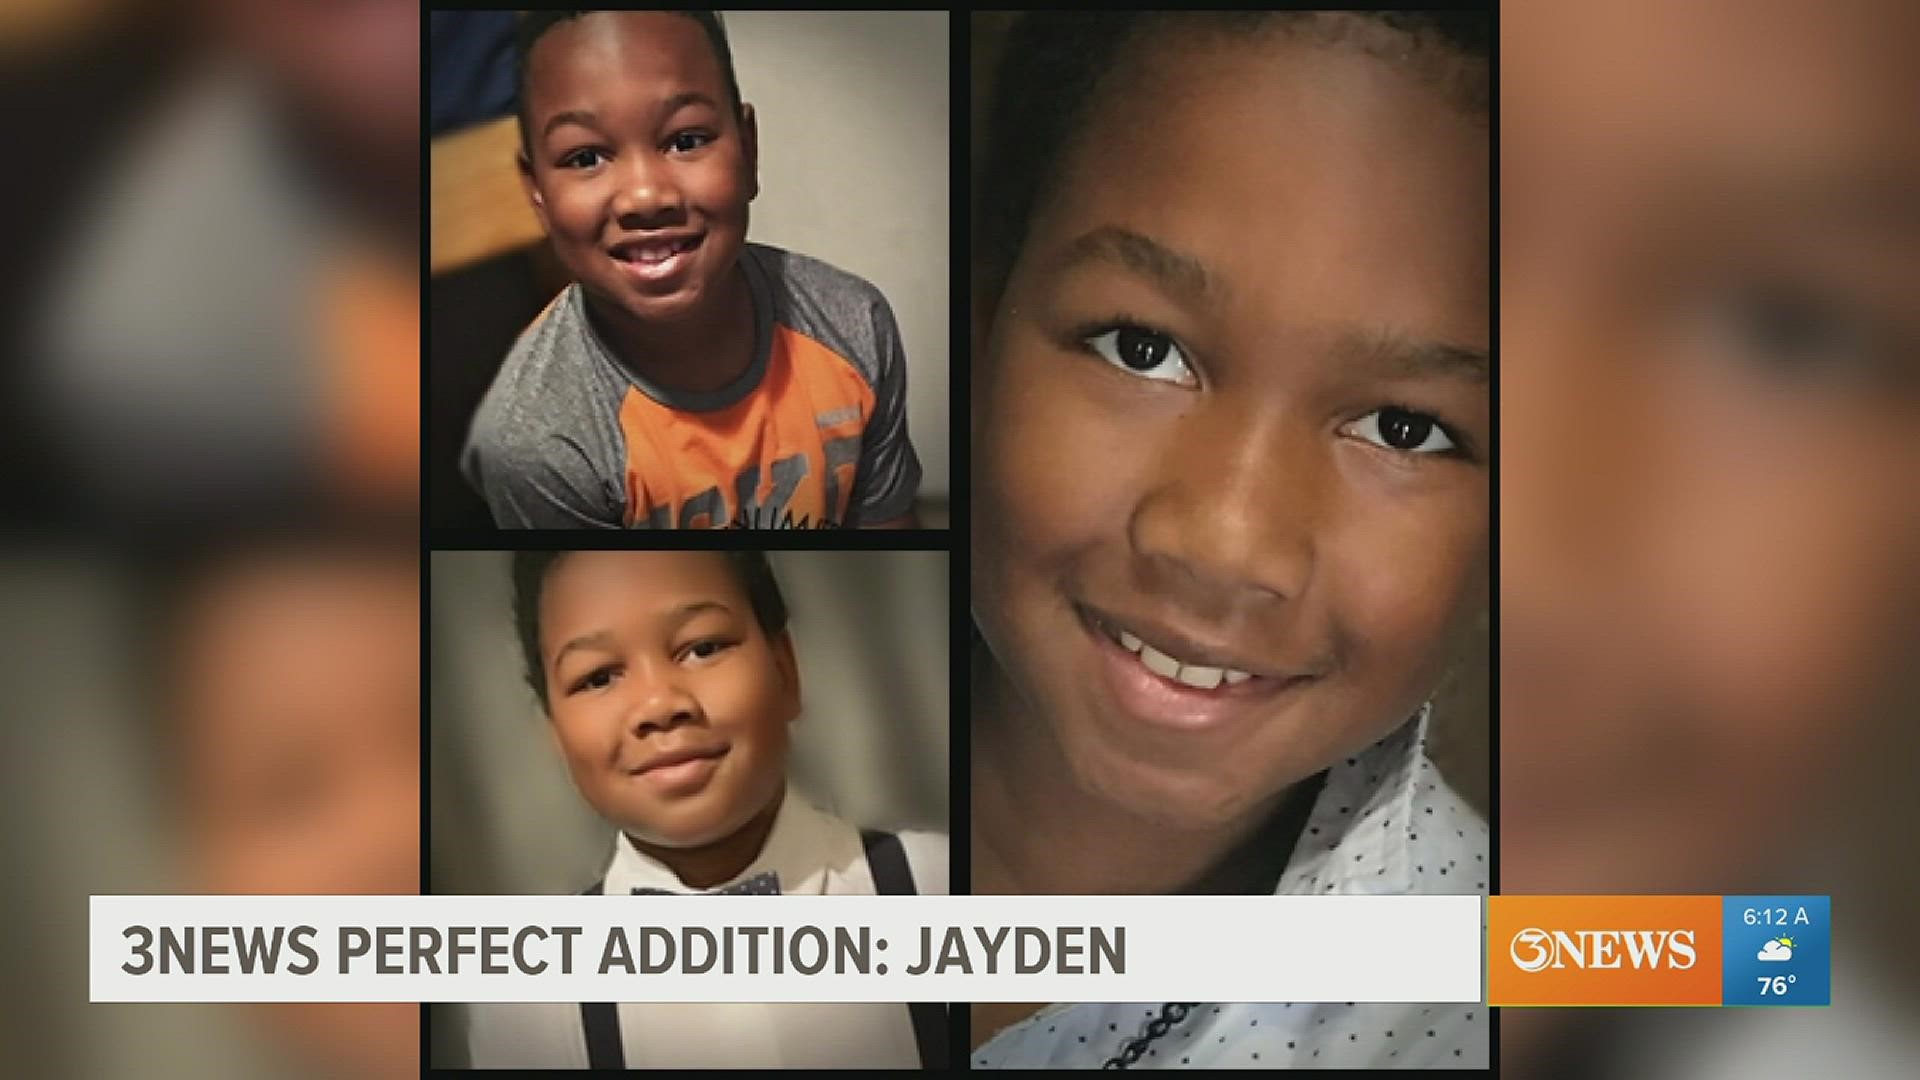 11-year-old Jayden likes math, reading, science, and is also working to learn to speak Spanish and could be the Perfect Addition to your family.